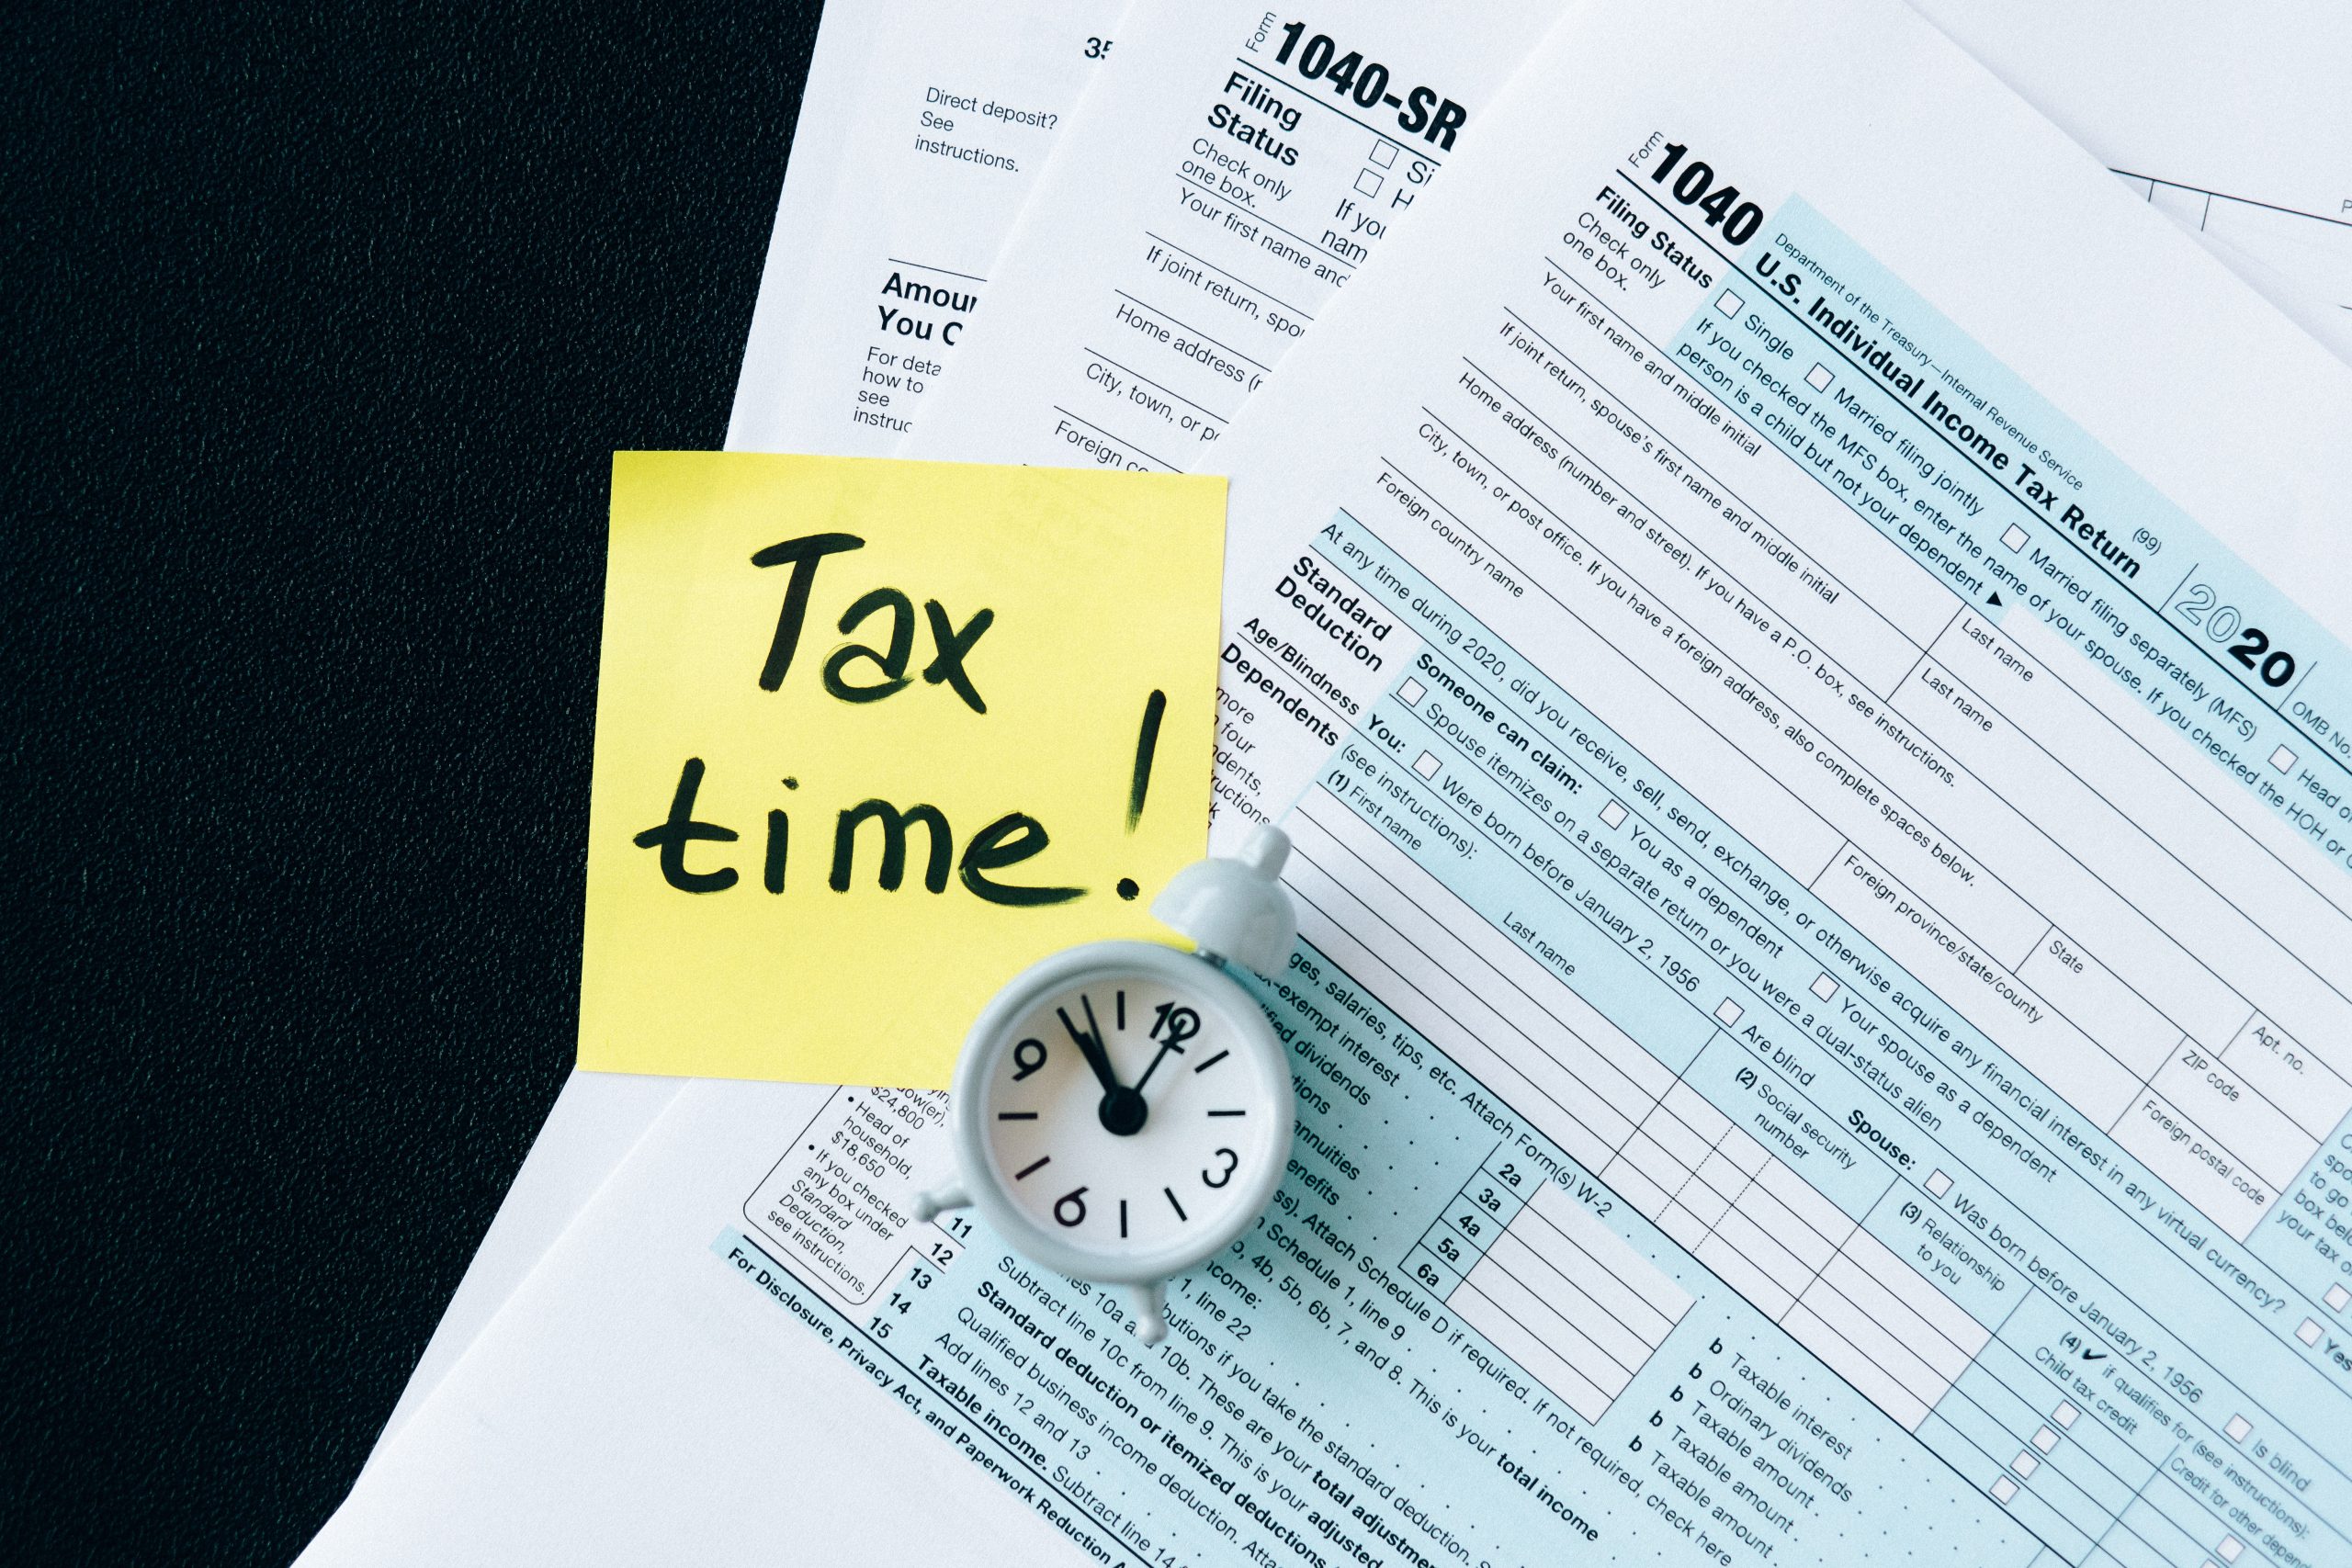 A Sticky note with the words "Tax Time" on it